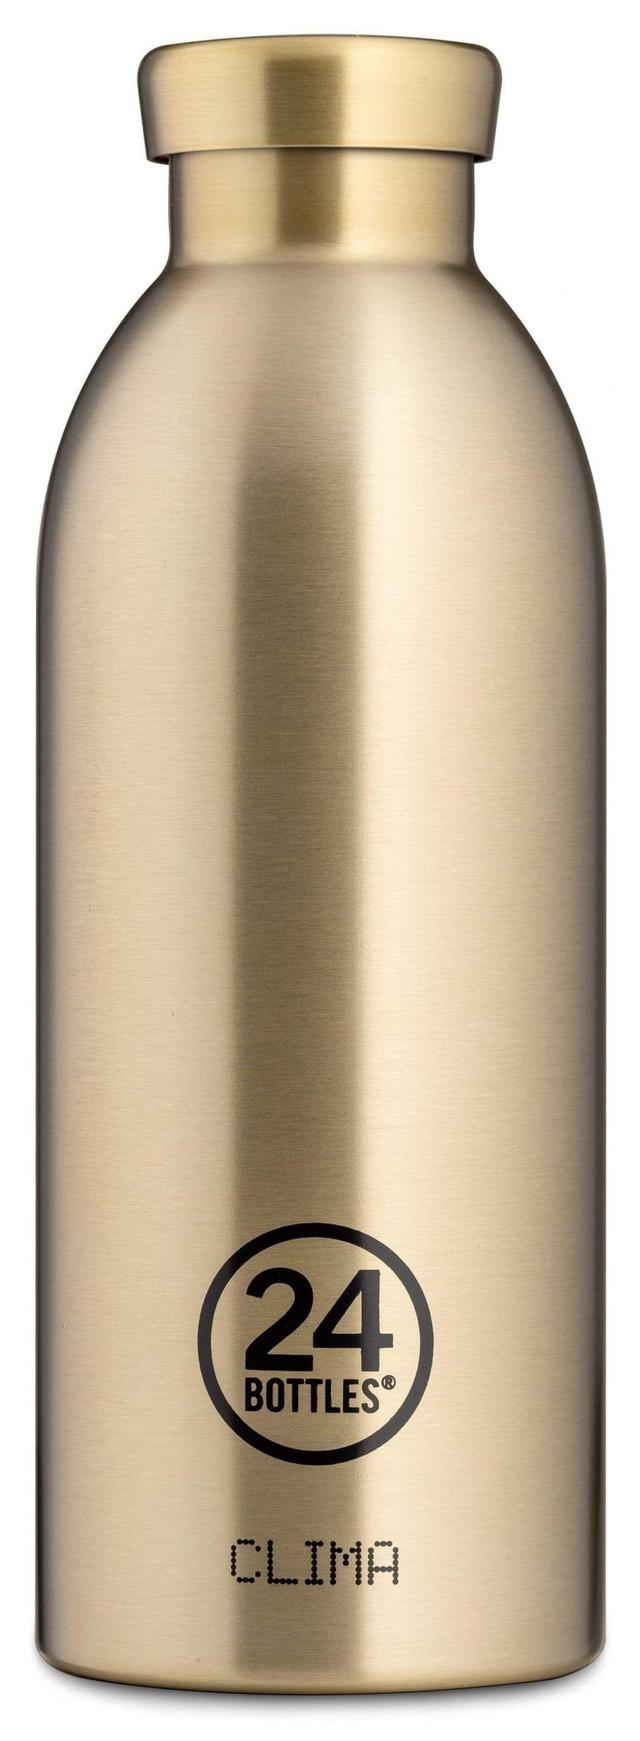 24bottles clima bottle 500ml double walled insulated stainless steel water bottle eco friendly reusable bpa free hot cold modern portable leak proof for travel office home gym procecco gold - SW1hZ2U6Njg4MTQ=